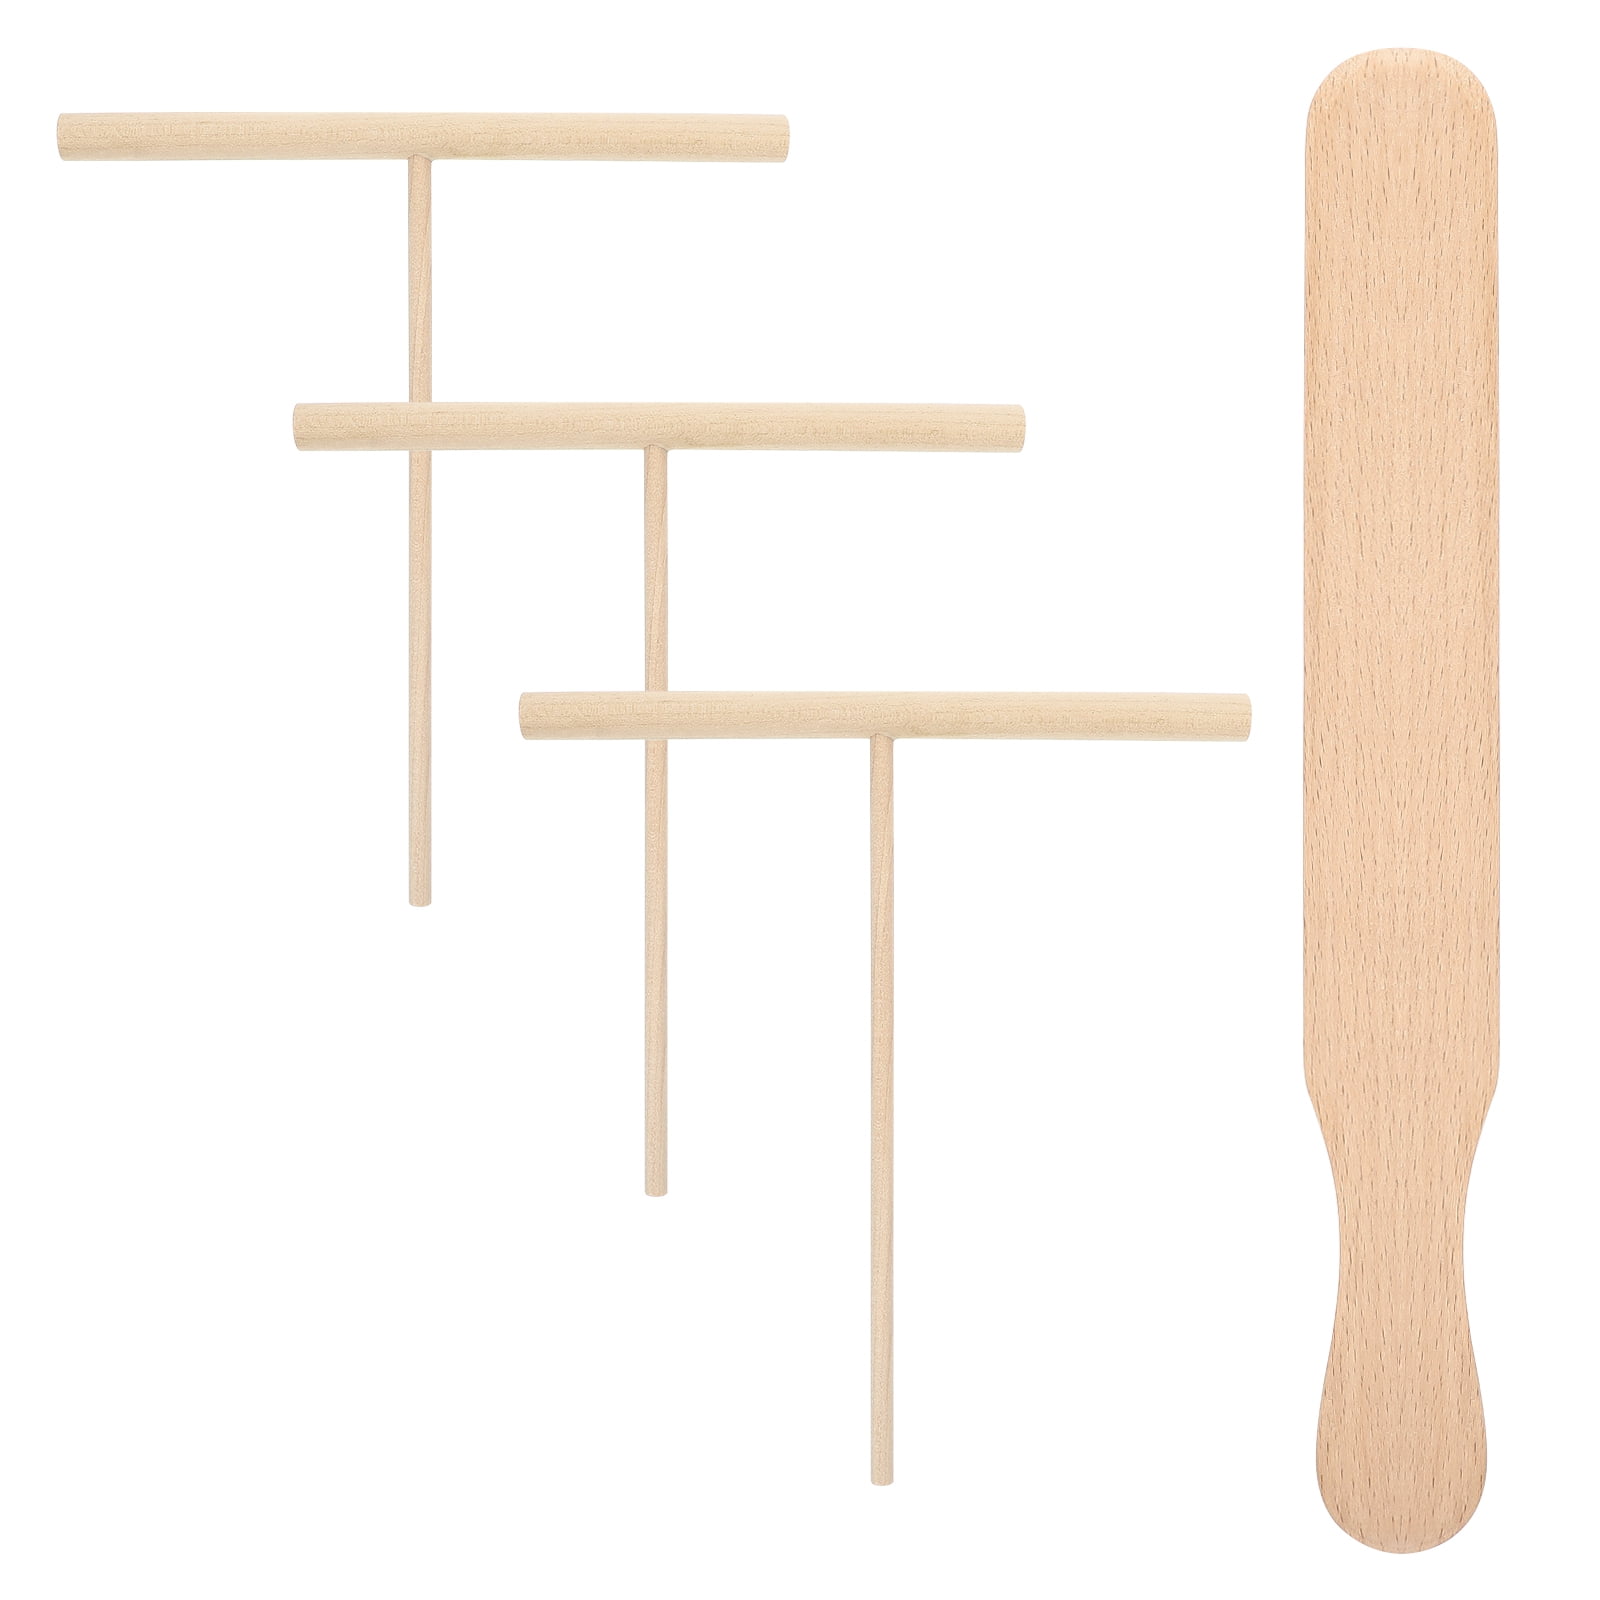 Mrs Anderson's 2pc Beechwood T-Shaped Crepe Spreader and Spatula Set –  Handy Housewares